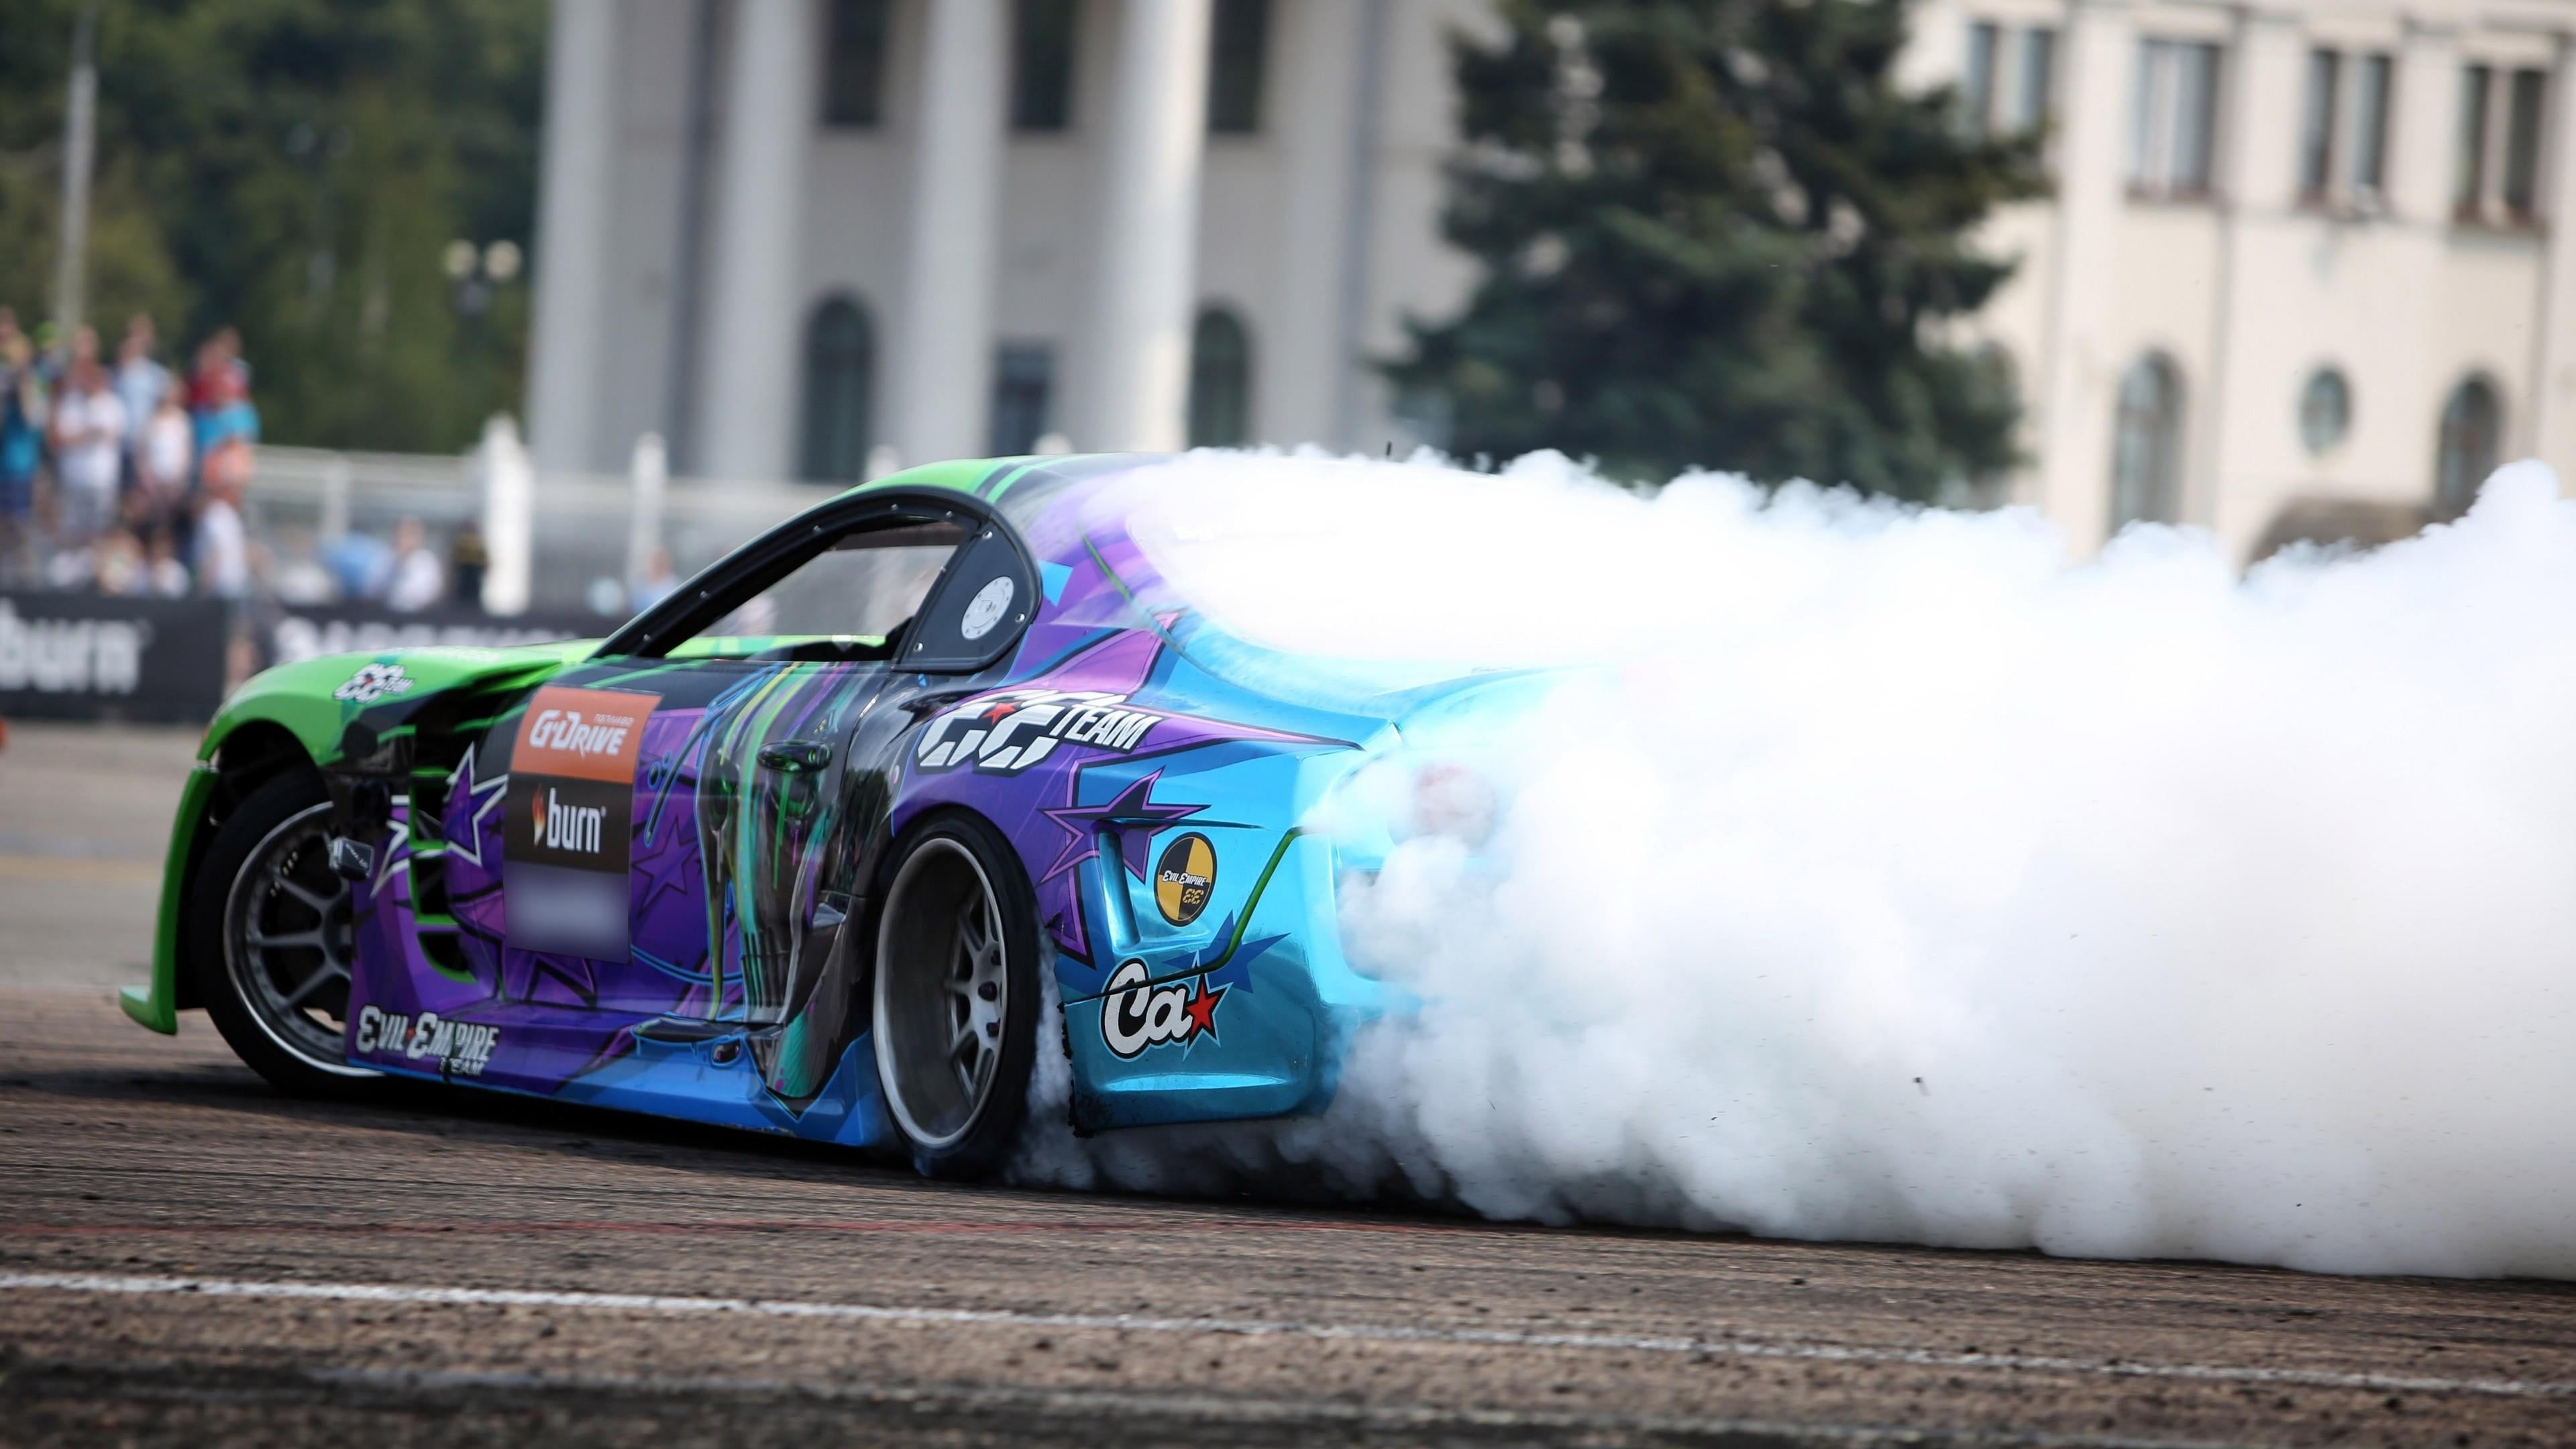 Drifting: Vehicle vinyl wrap, Burning Wheels event, Smoking tires, Professional driving techniques. 3840x2160 4K Background.